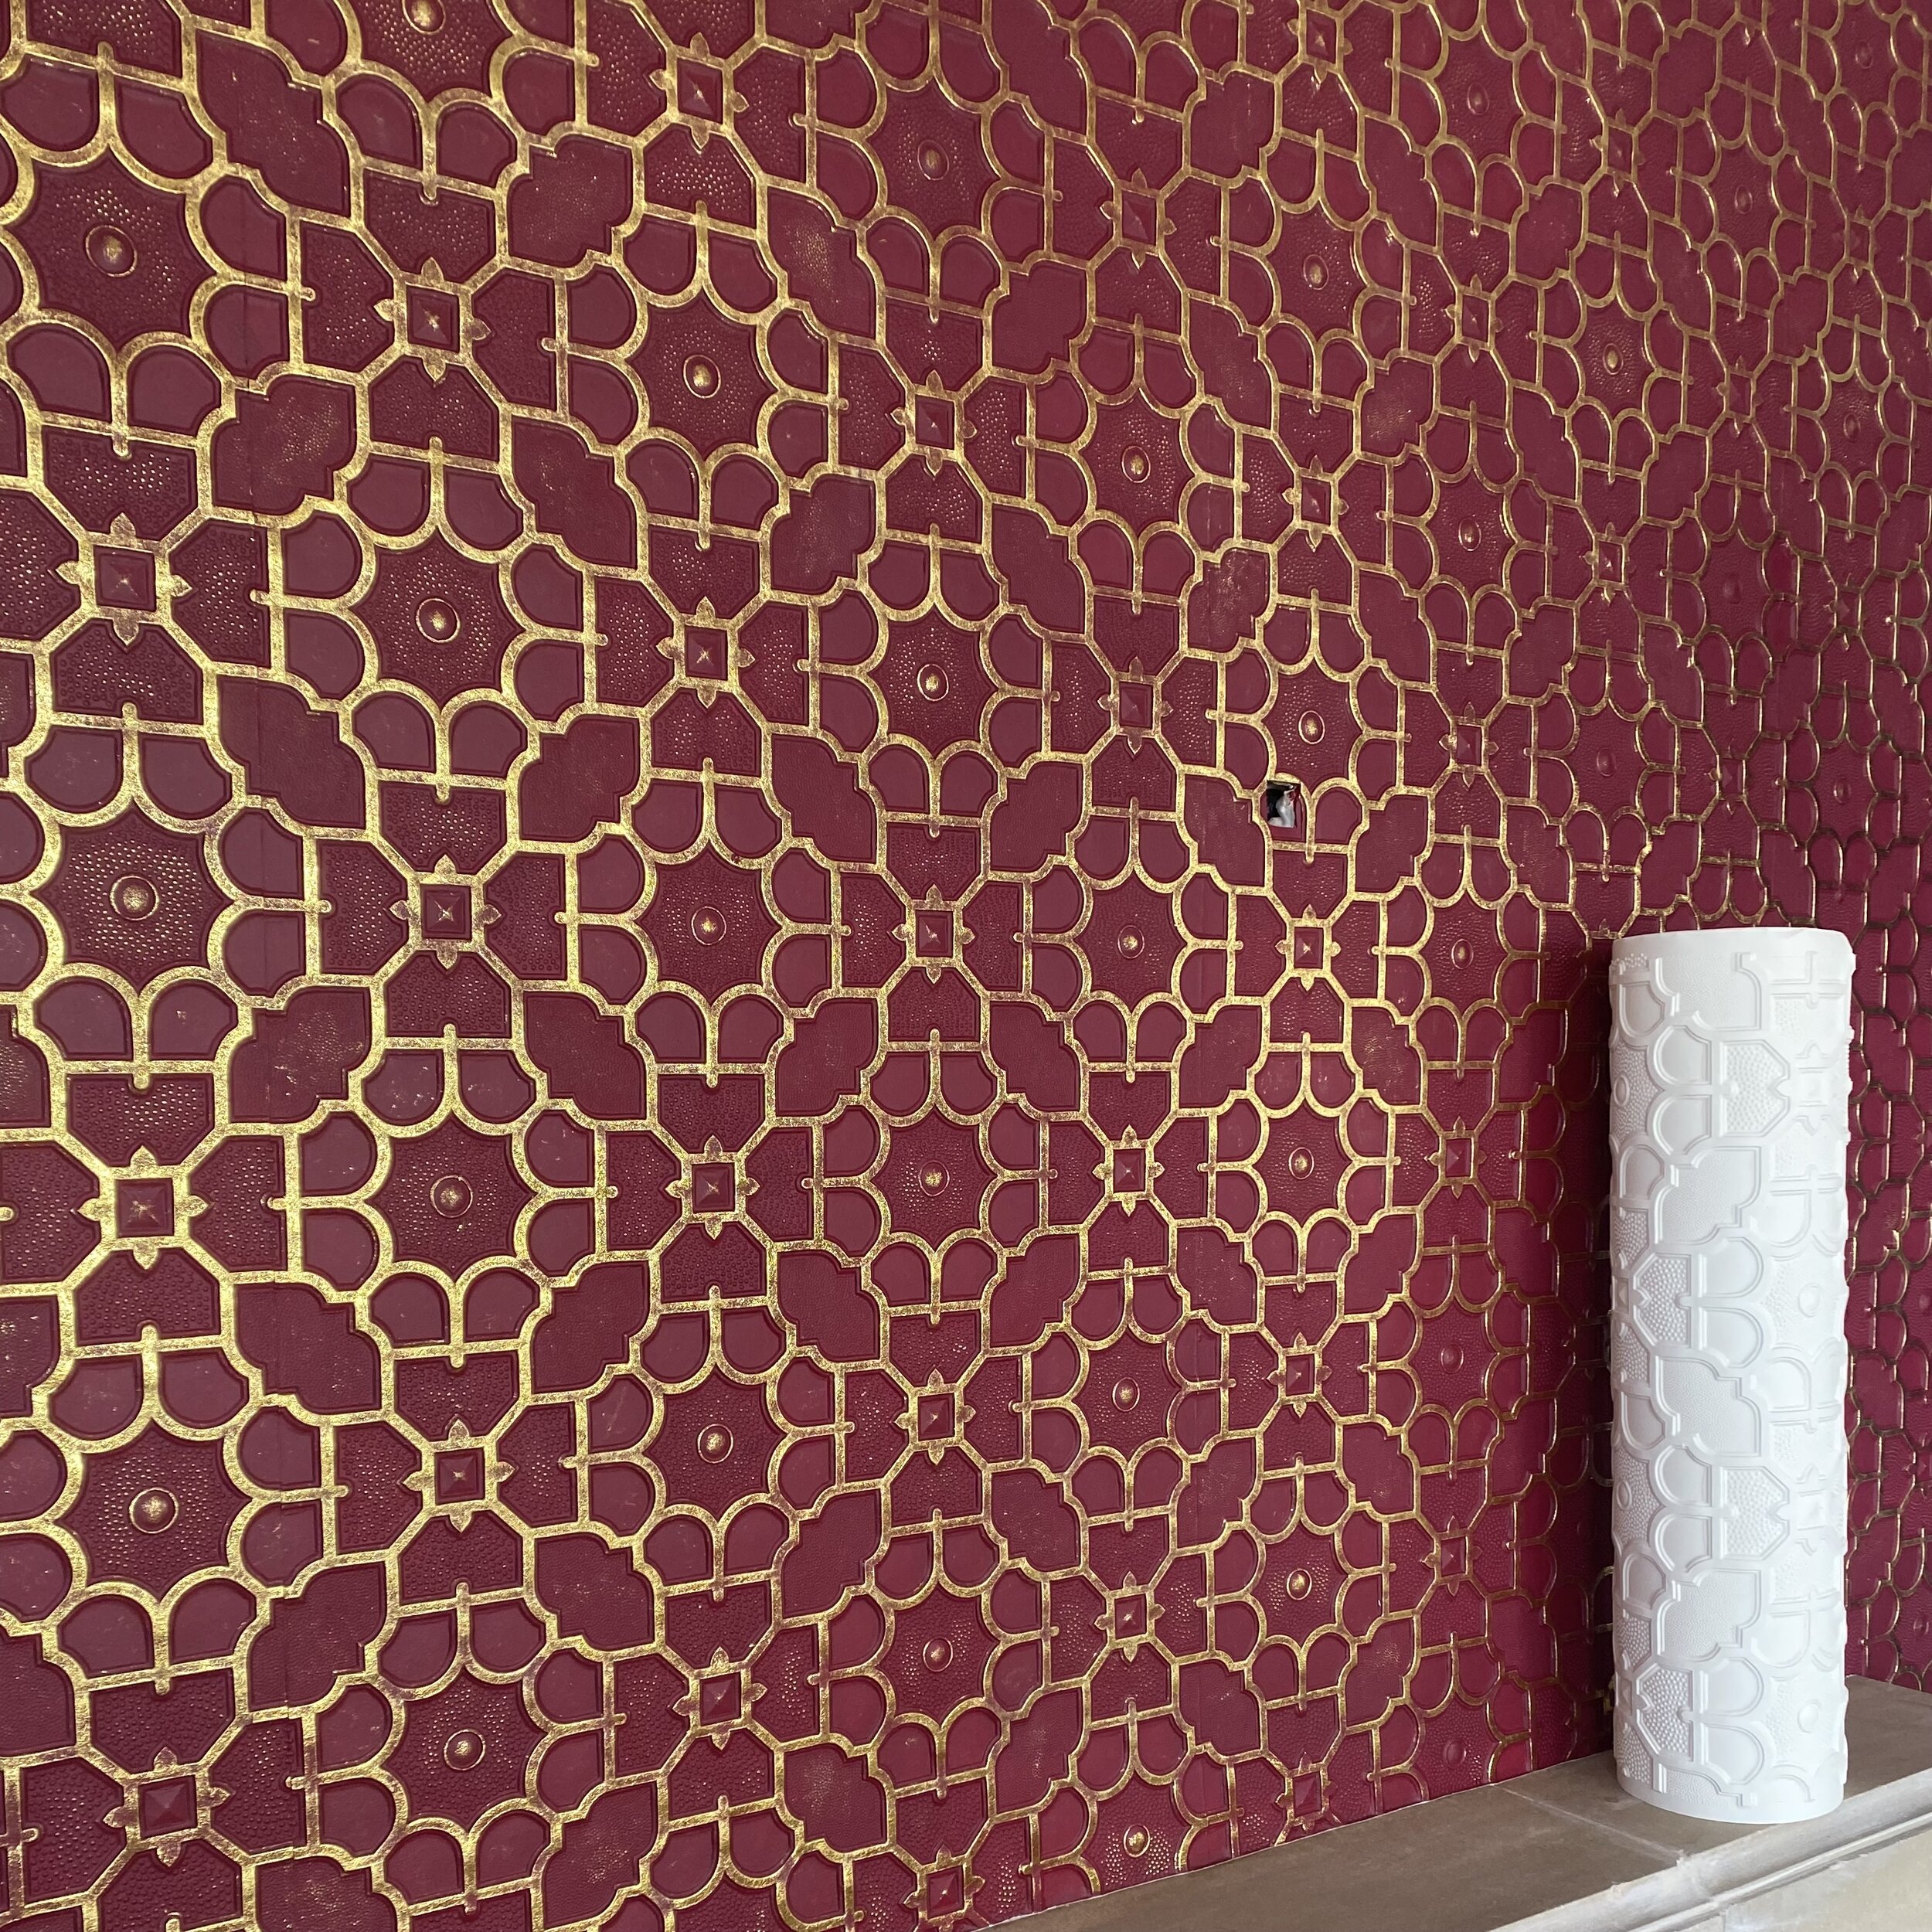 Bespoke Lincrusta Feature wall with Gilded Gold Highlights by Frank Holmes Ltd, Lancashire